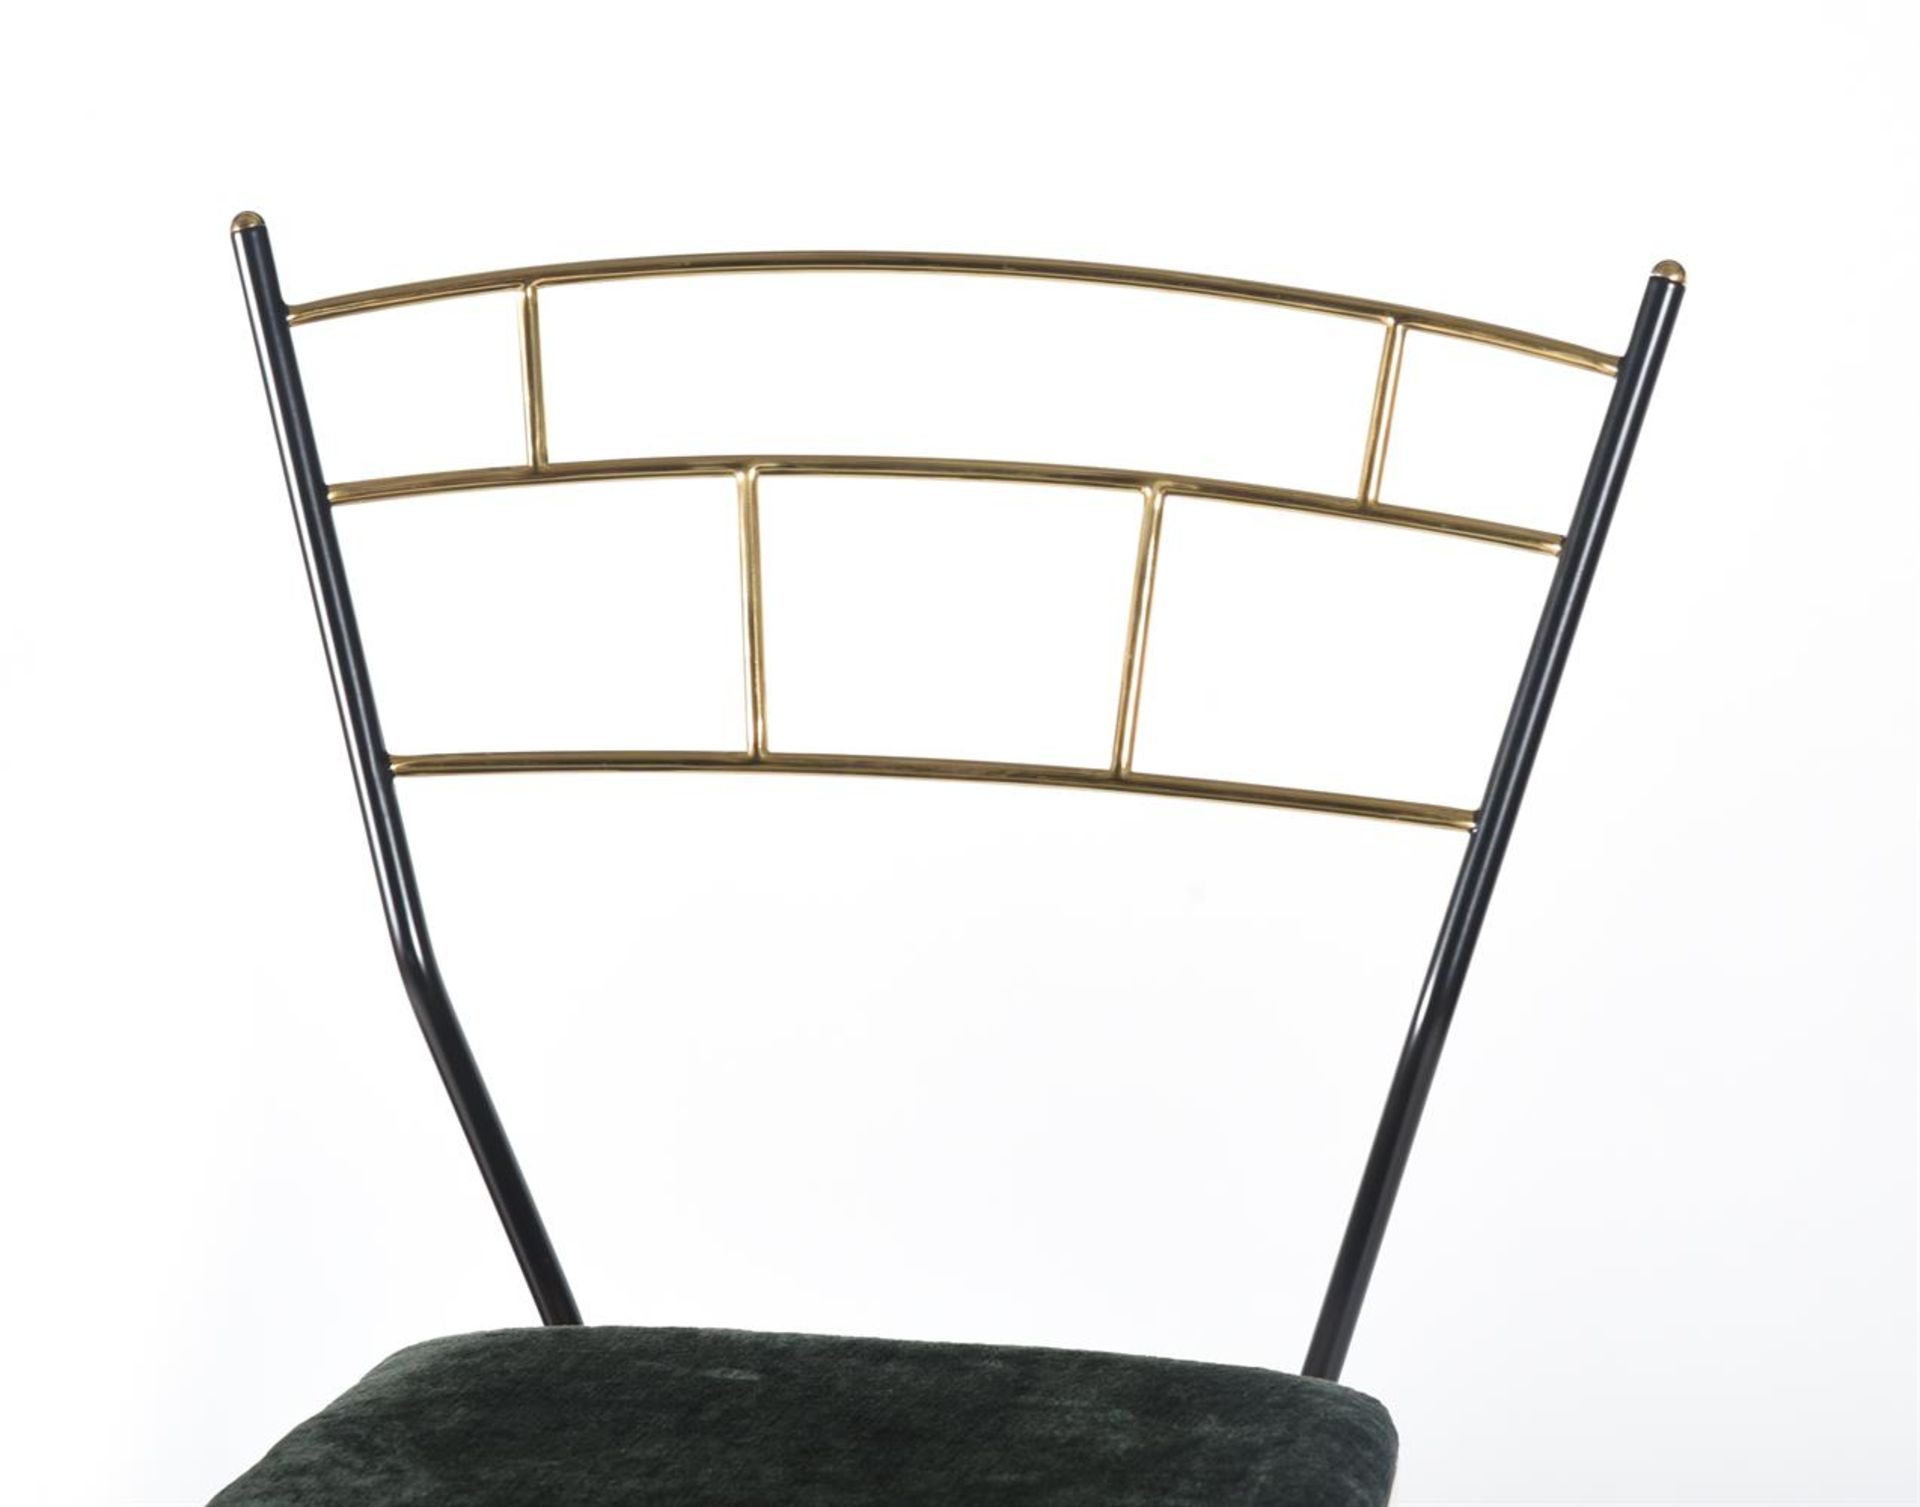 A PAIR OF TUBULAR BLACK METAL AND BRASS BAR STOOLS AND A SIDE CHAIR BY ANOUSKA HEMPEL - Image 2 of 2